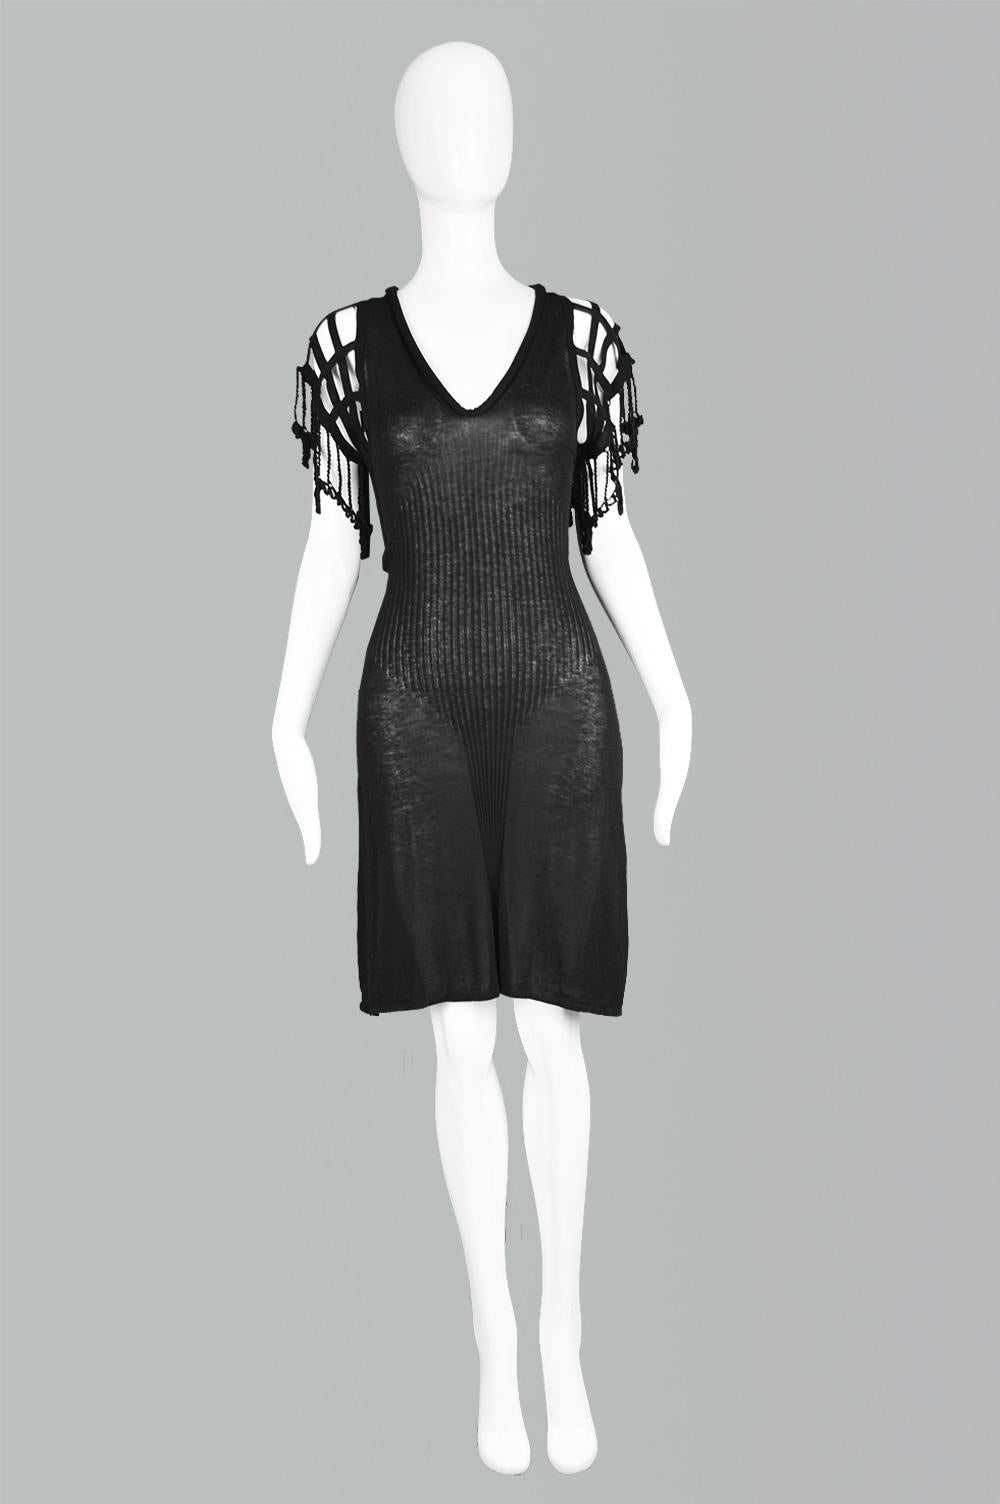 Jean Paul Gaultier Maille Femme Vintage Fine Knit Crochet Sleeve Dress

Click 'Continue Reading' for size and description.

Size: Marked XS but best fits a UK 6-8/ US 2-4/ EU 34-36 due to stretch. 
Bust - Stretches up to 34” / 86cm
Waist - Stretches